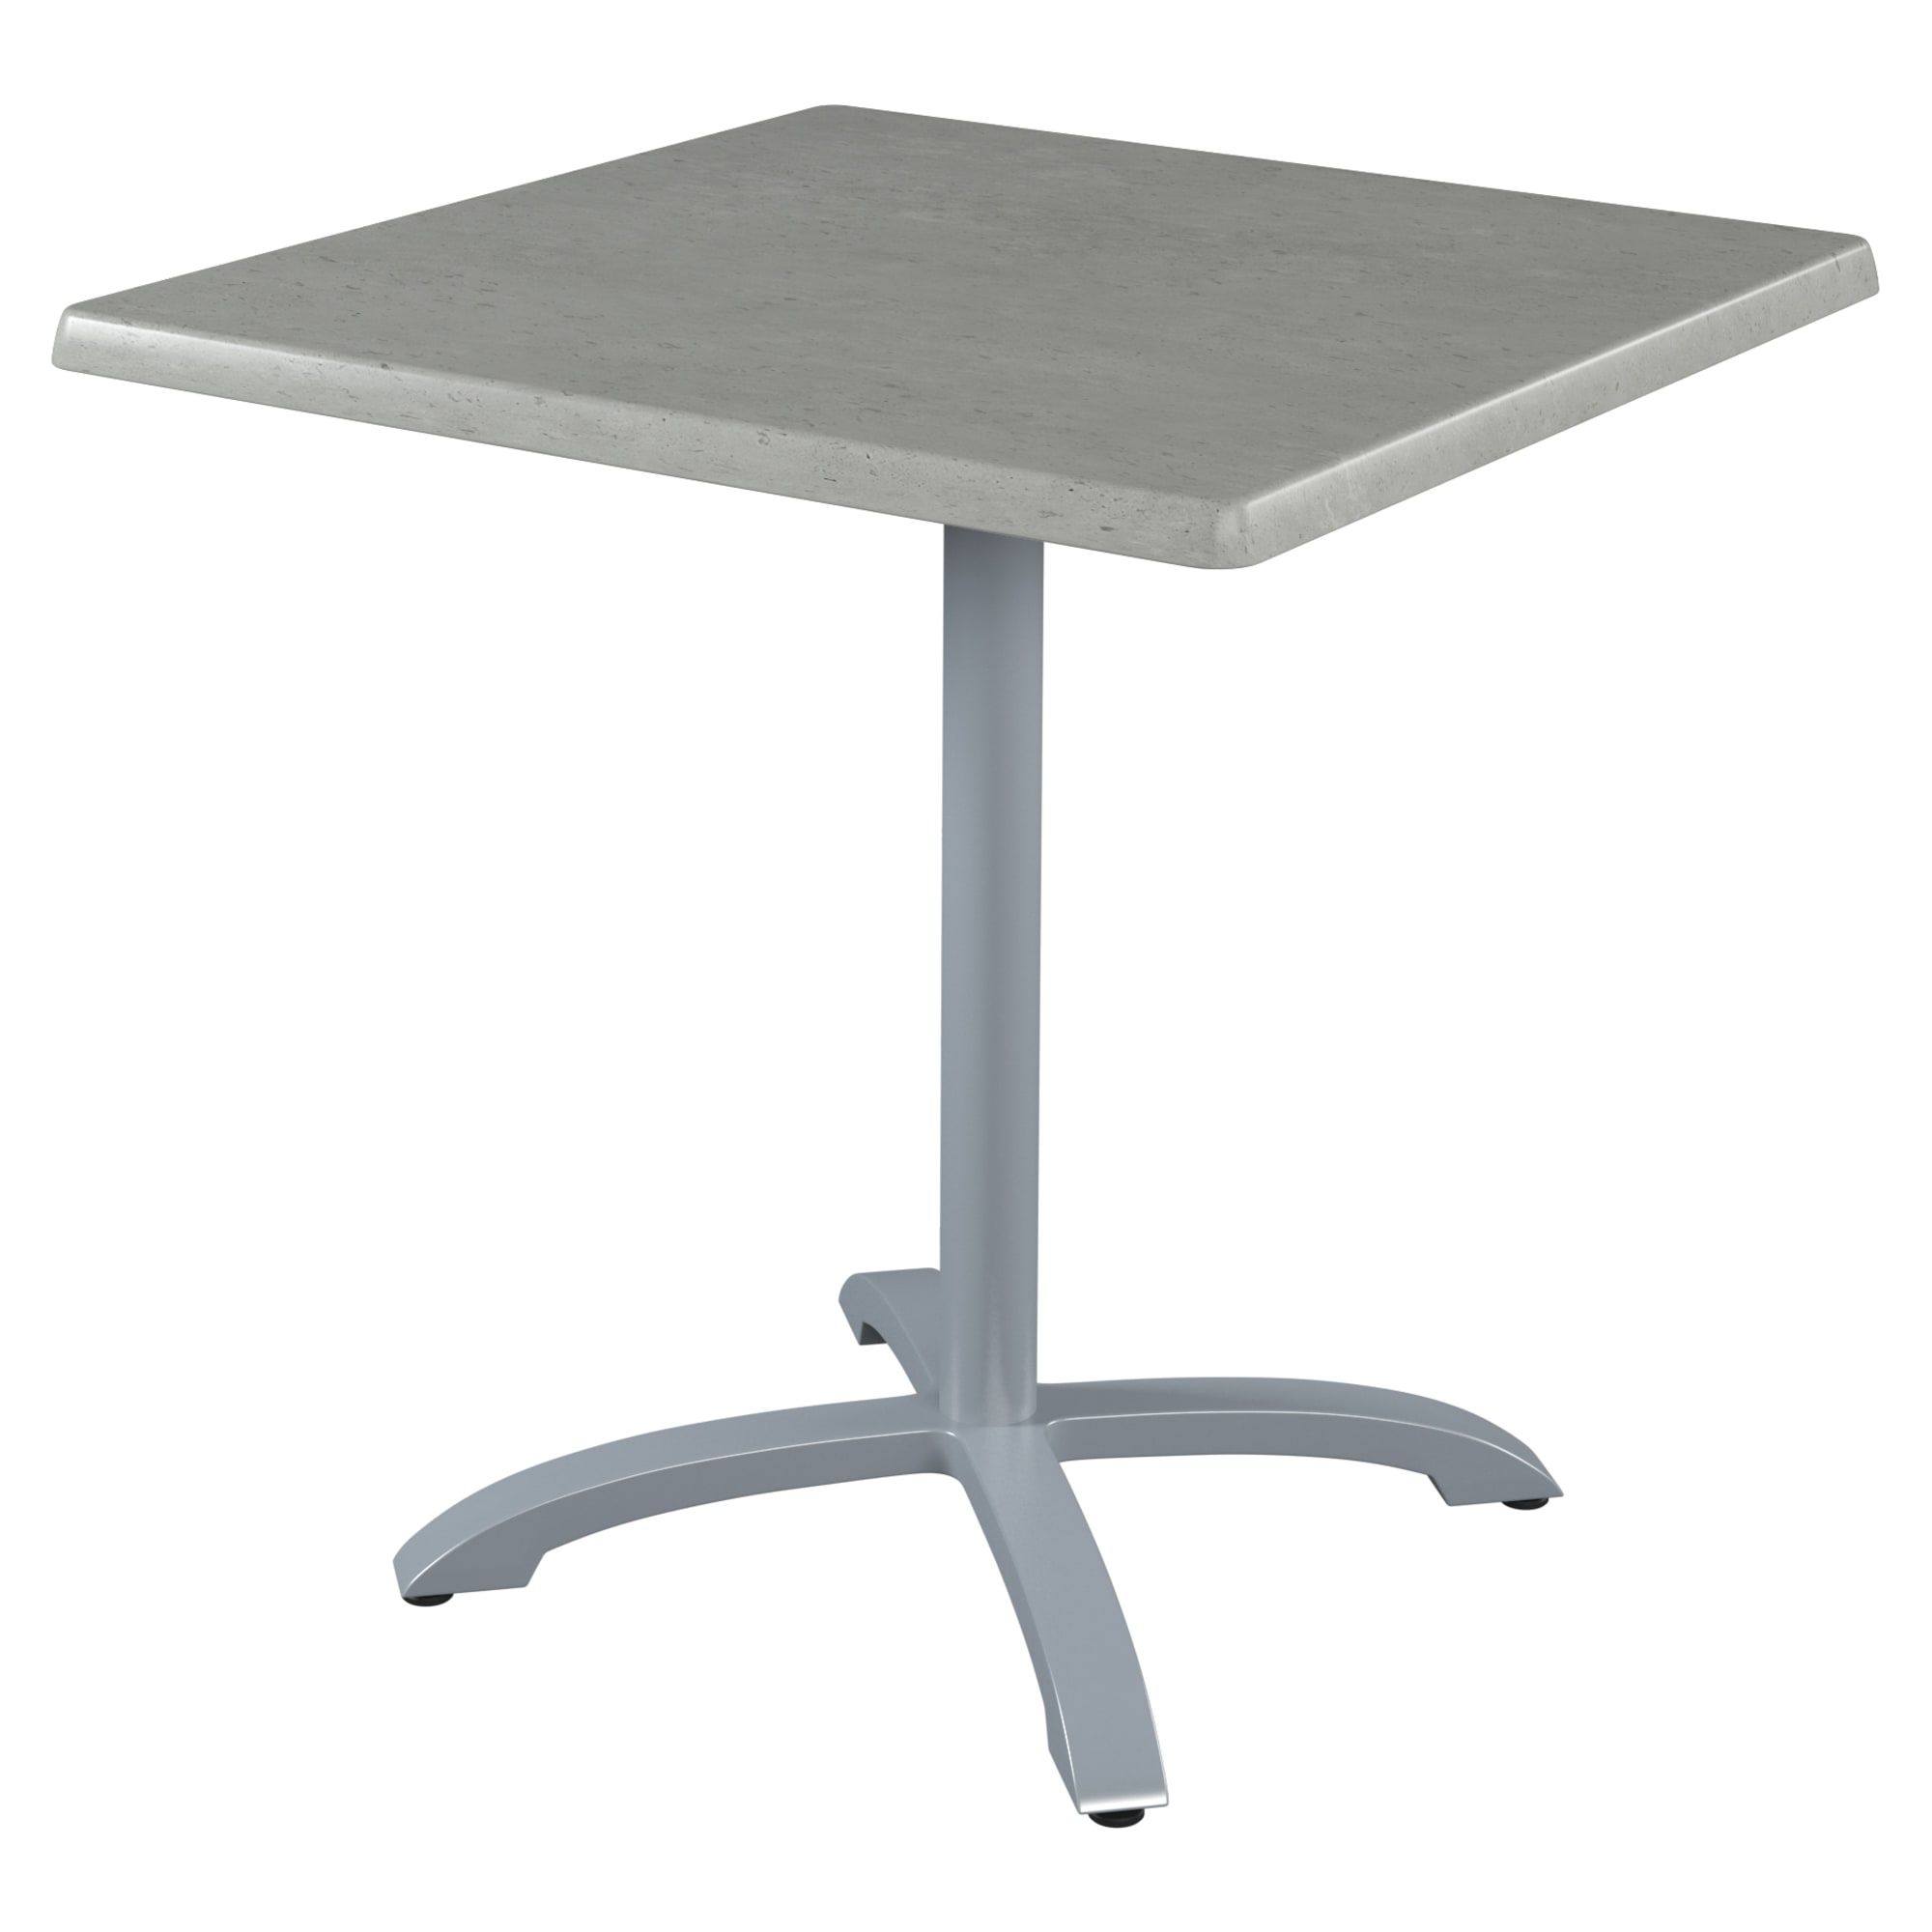 Well Known Heavy Duty Outdoor Resin Restaurant Table With Aluminum Base Pertaining To Resin Outdoor Tables (View 12 of 15)